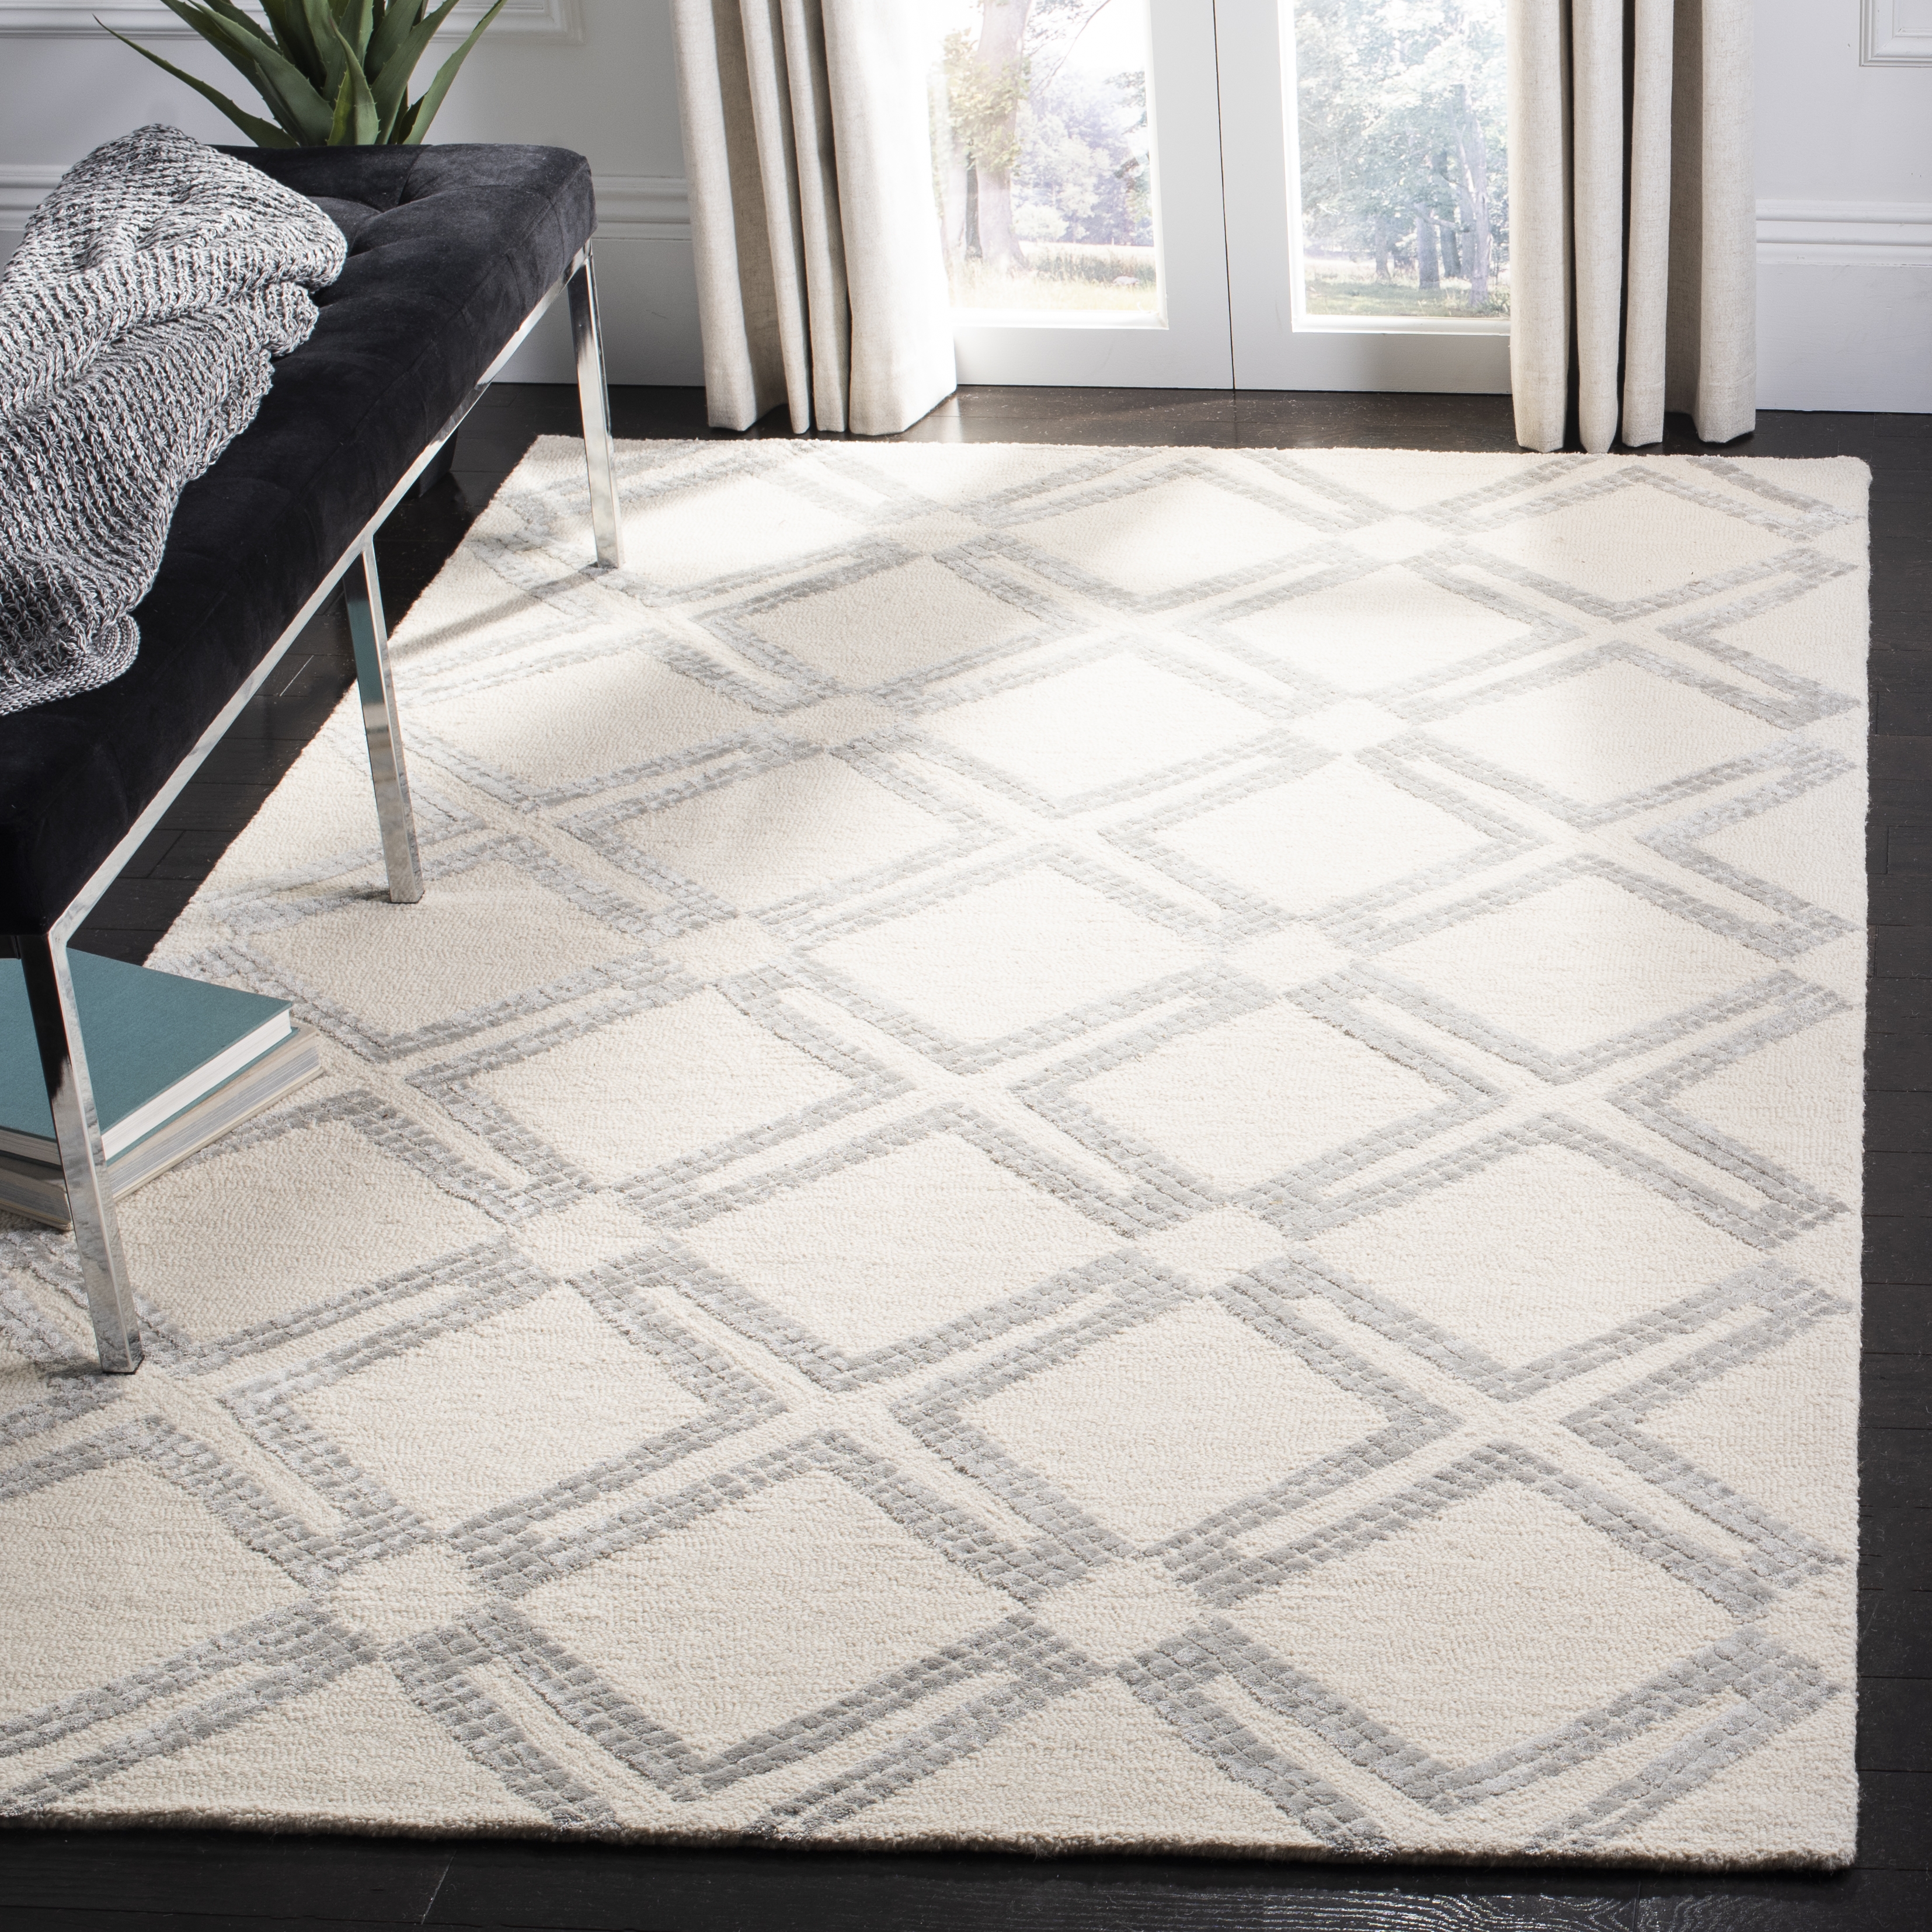 Arlo Home Hand Tufted Area Rug, BLG574G, Ivory/Silver,  4' X 6' - Image 1